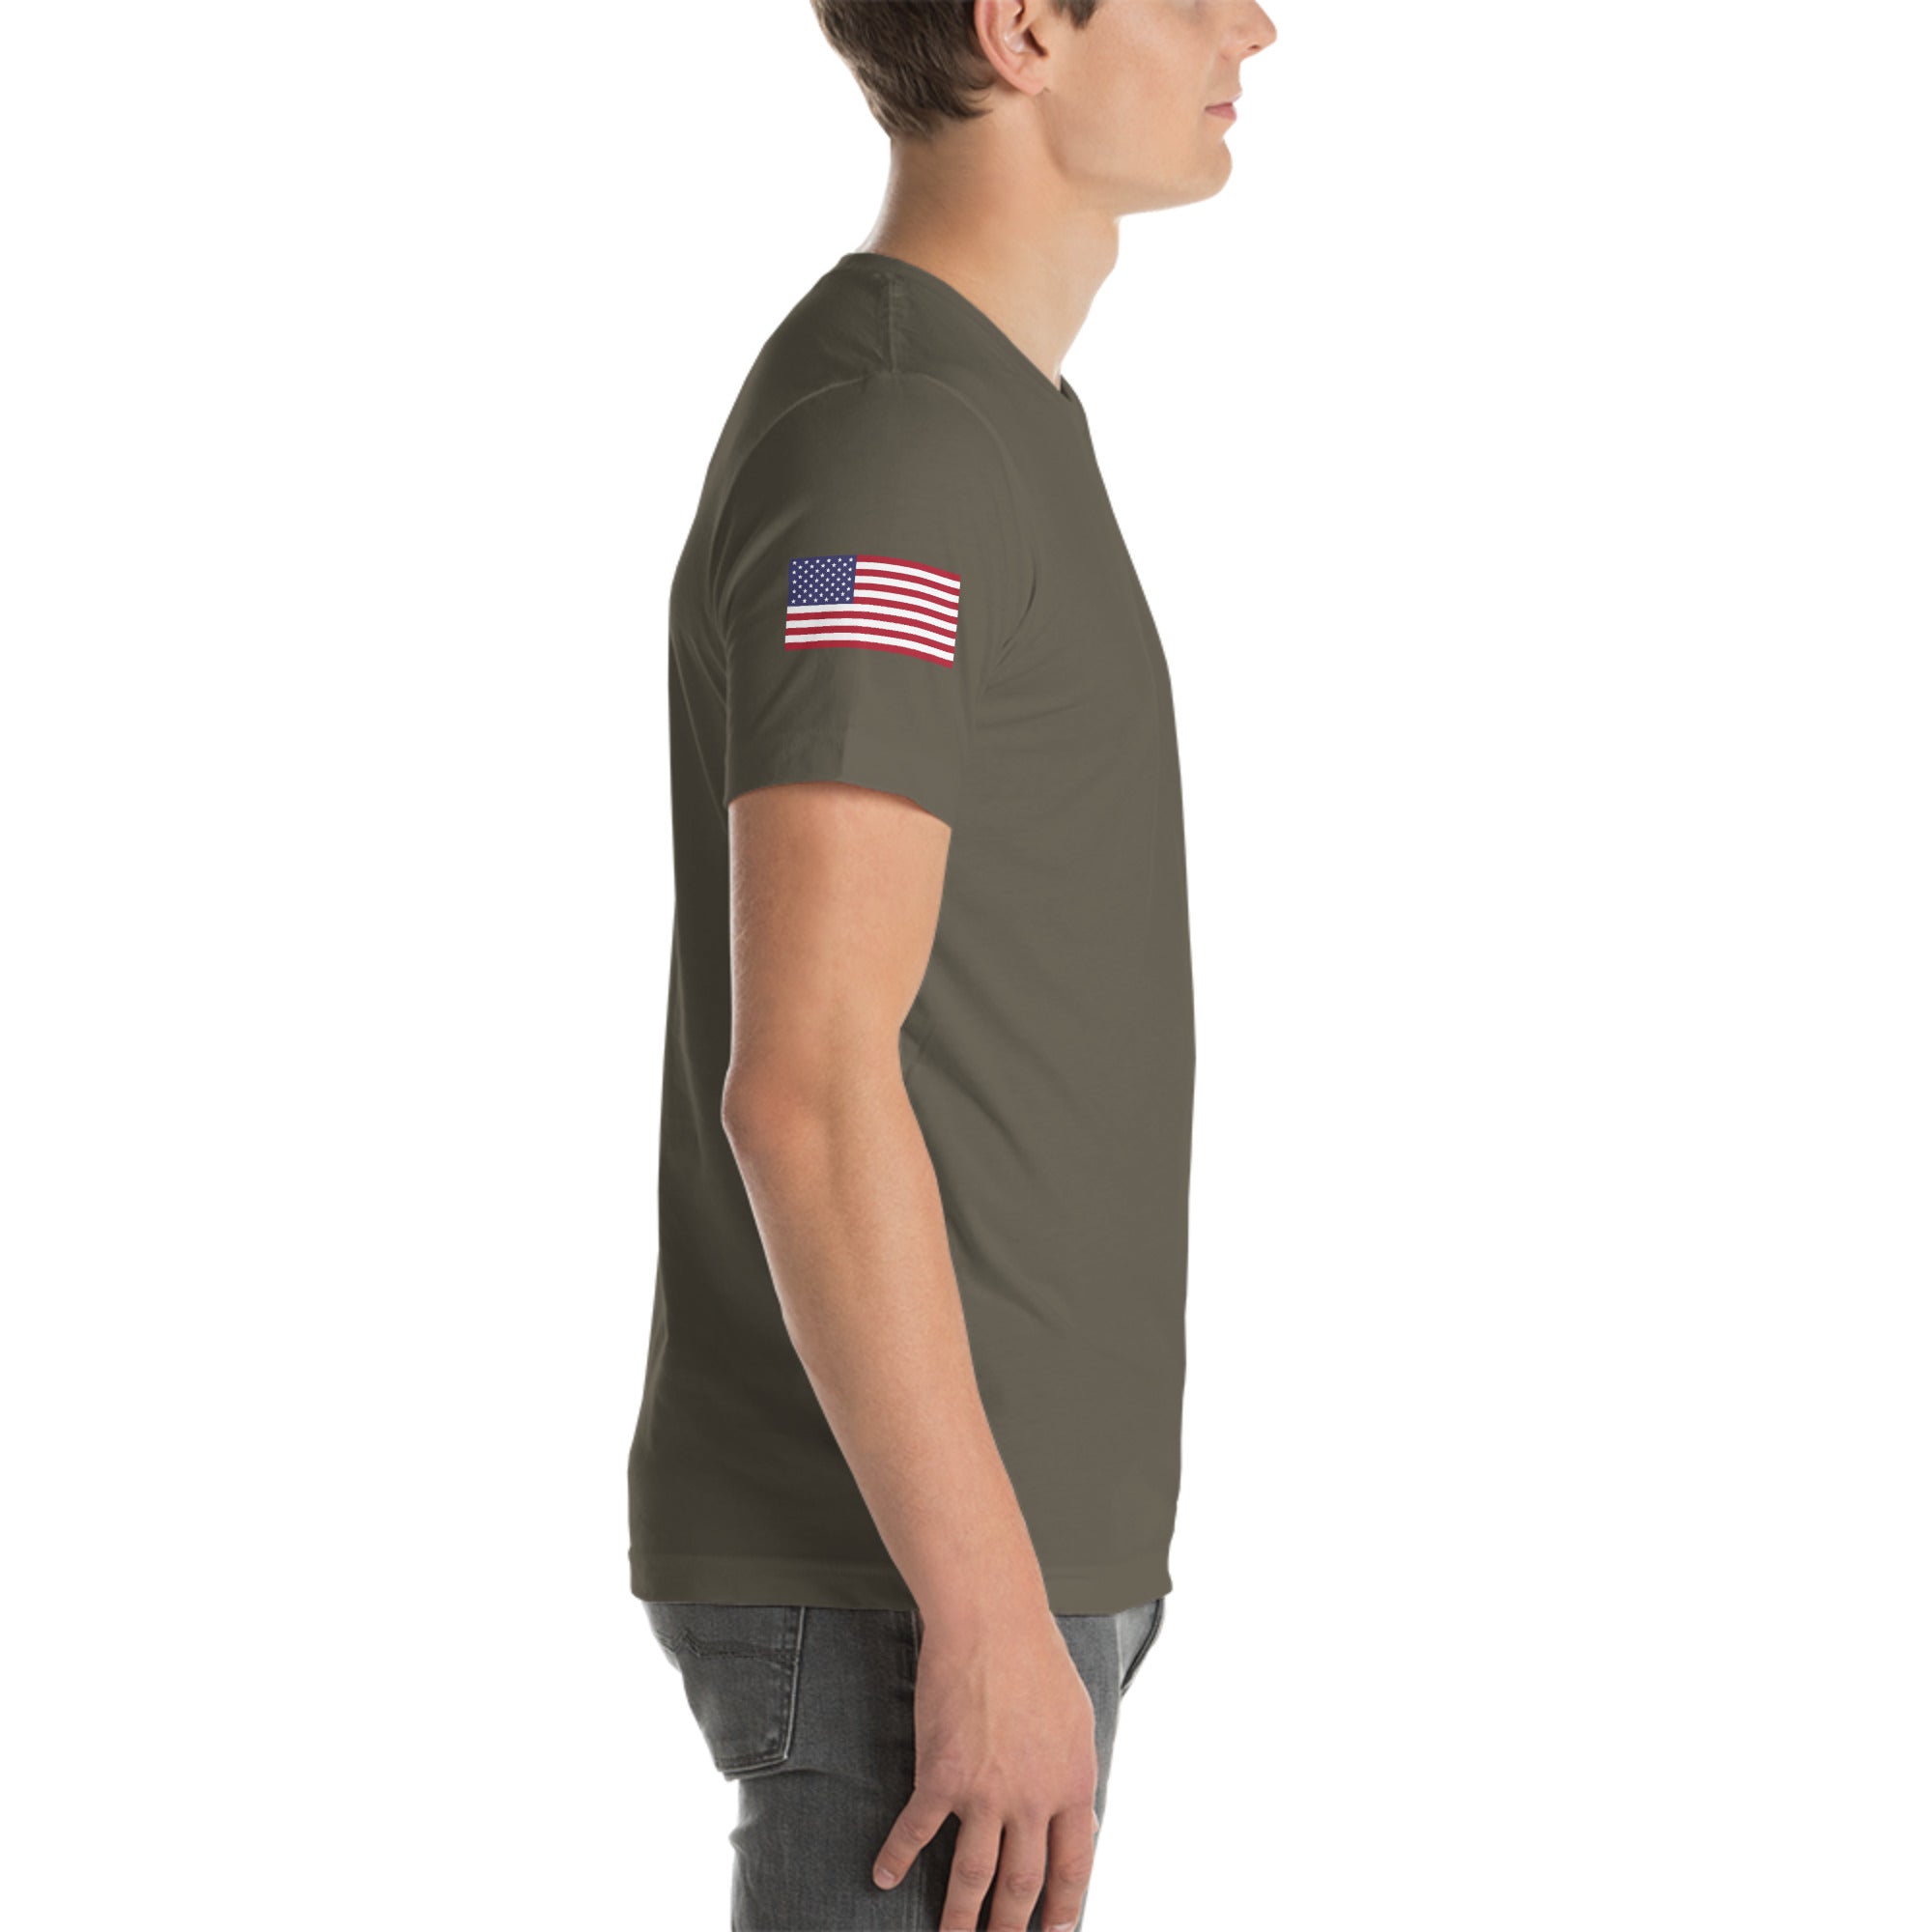 Laps of Honor Charity T-Shirt: Support US Veterans Corp with Style